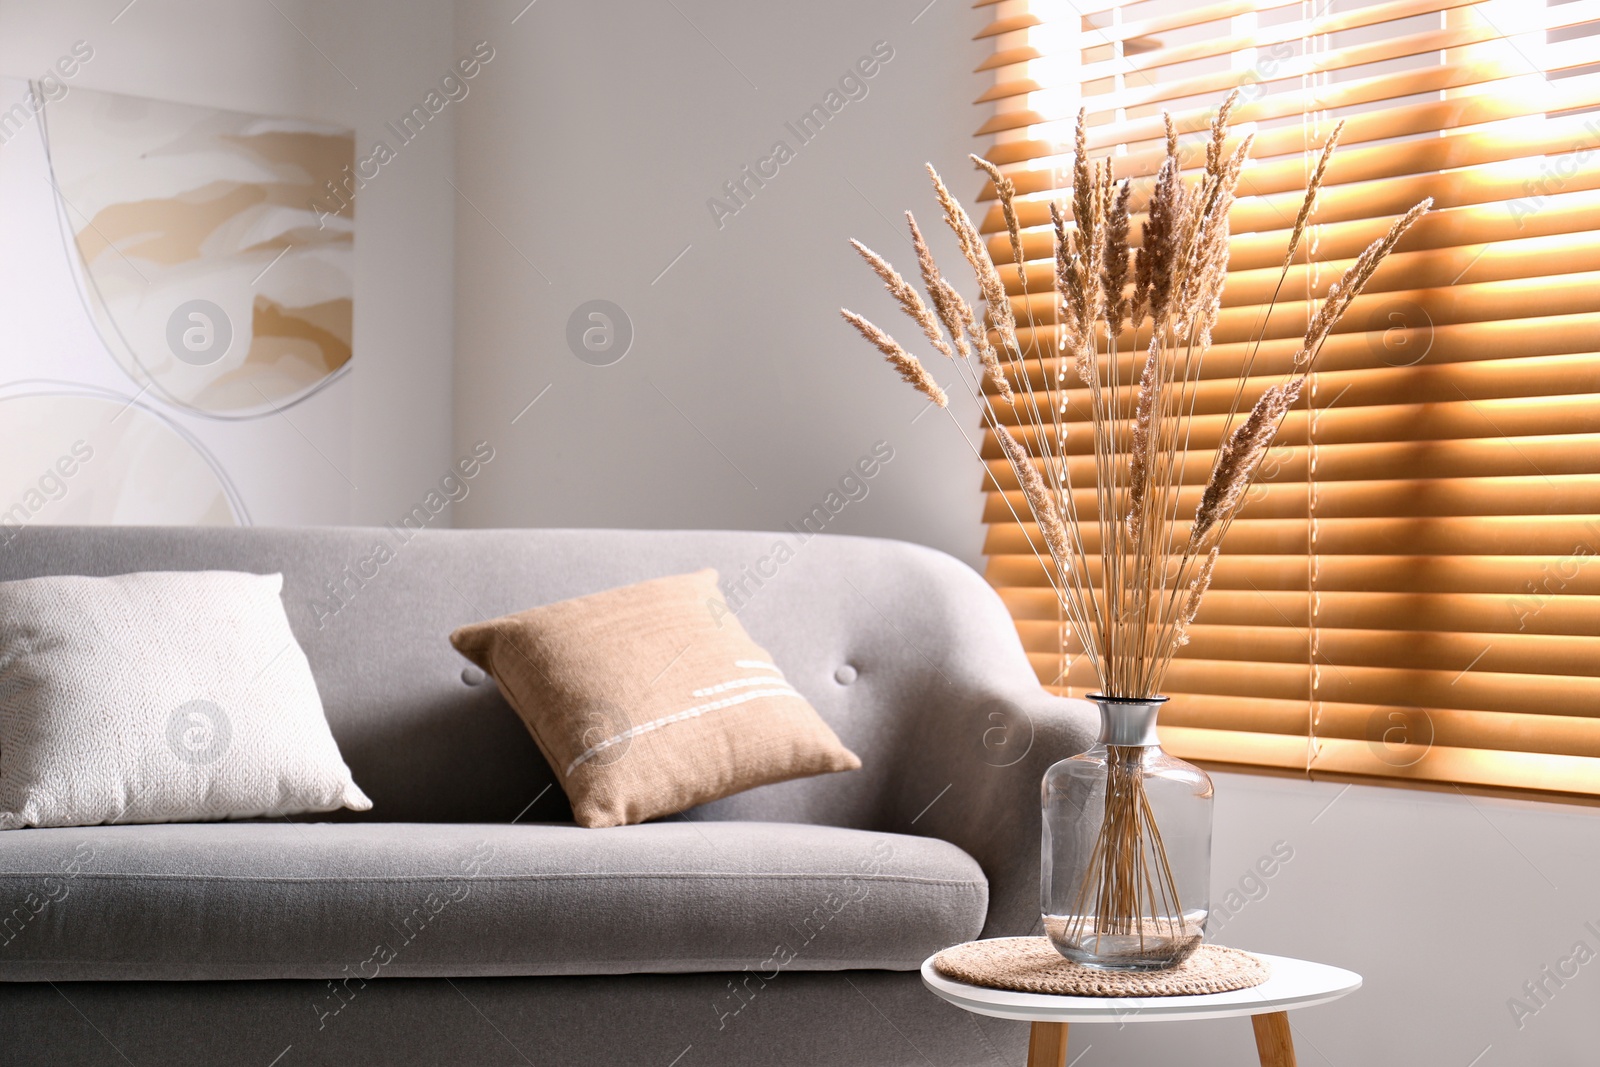 Photo of Vase with decorative dried plants on table in living room. Interior design